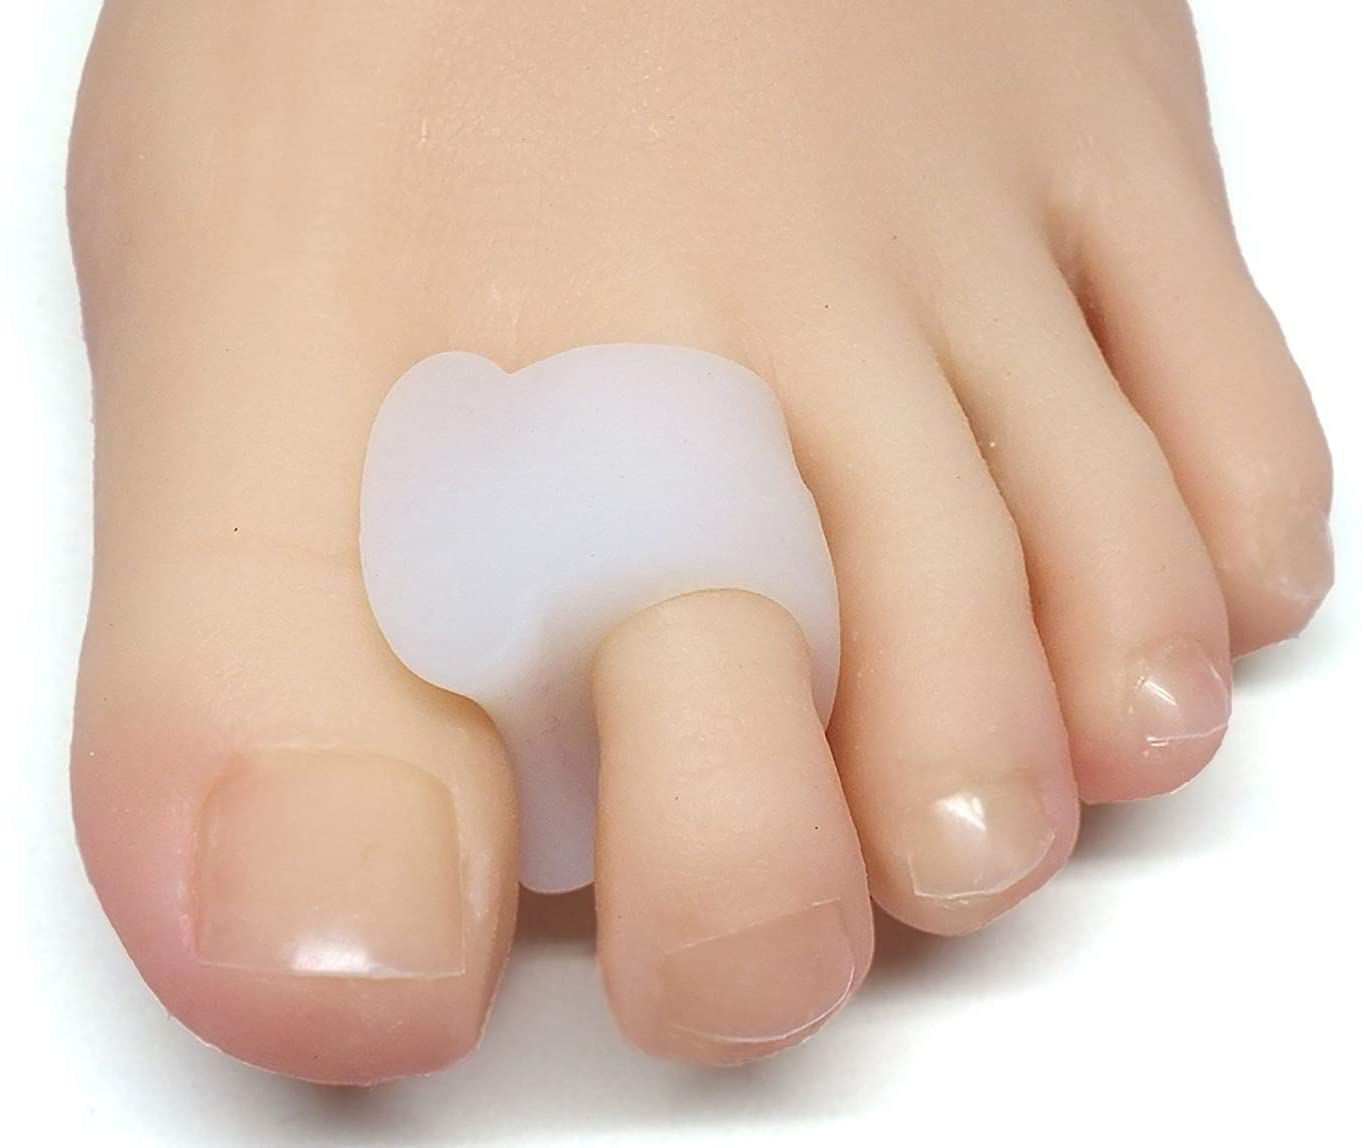 Zentoes Gel Toe Separators for Overlapping Toes, Bunions, Big Toe Alignment, Corrector and Spacer - 4 Pack (White)